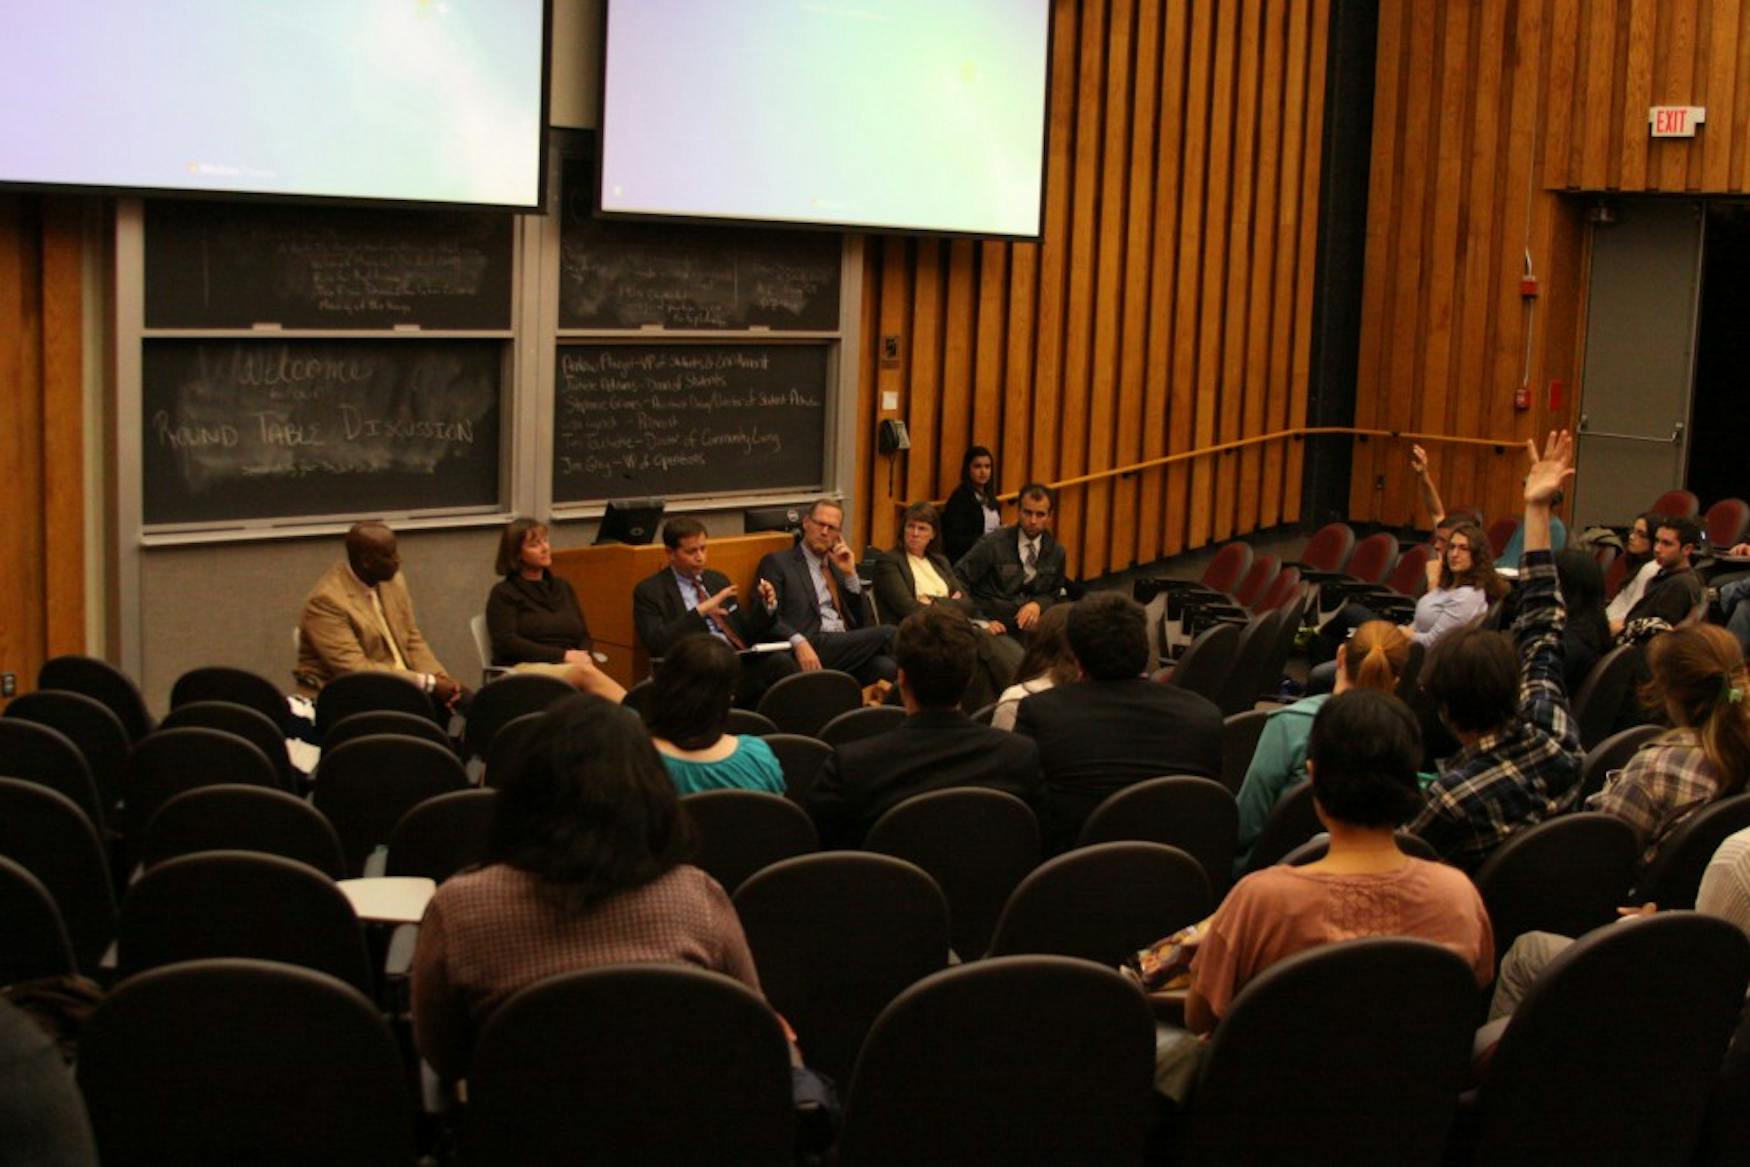 Students attended the Student Union roundtable event last Wednesday to ask some of the University's senior administrators about a number of topics.